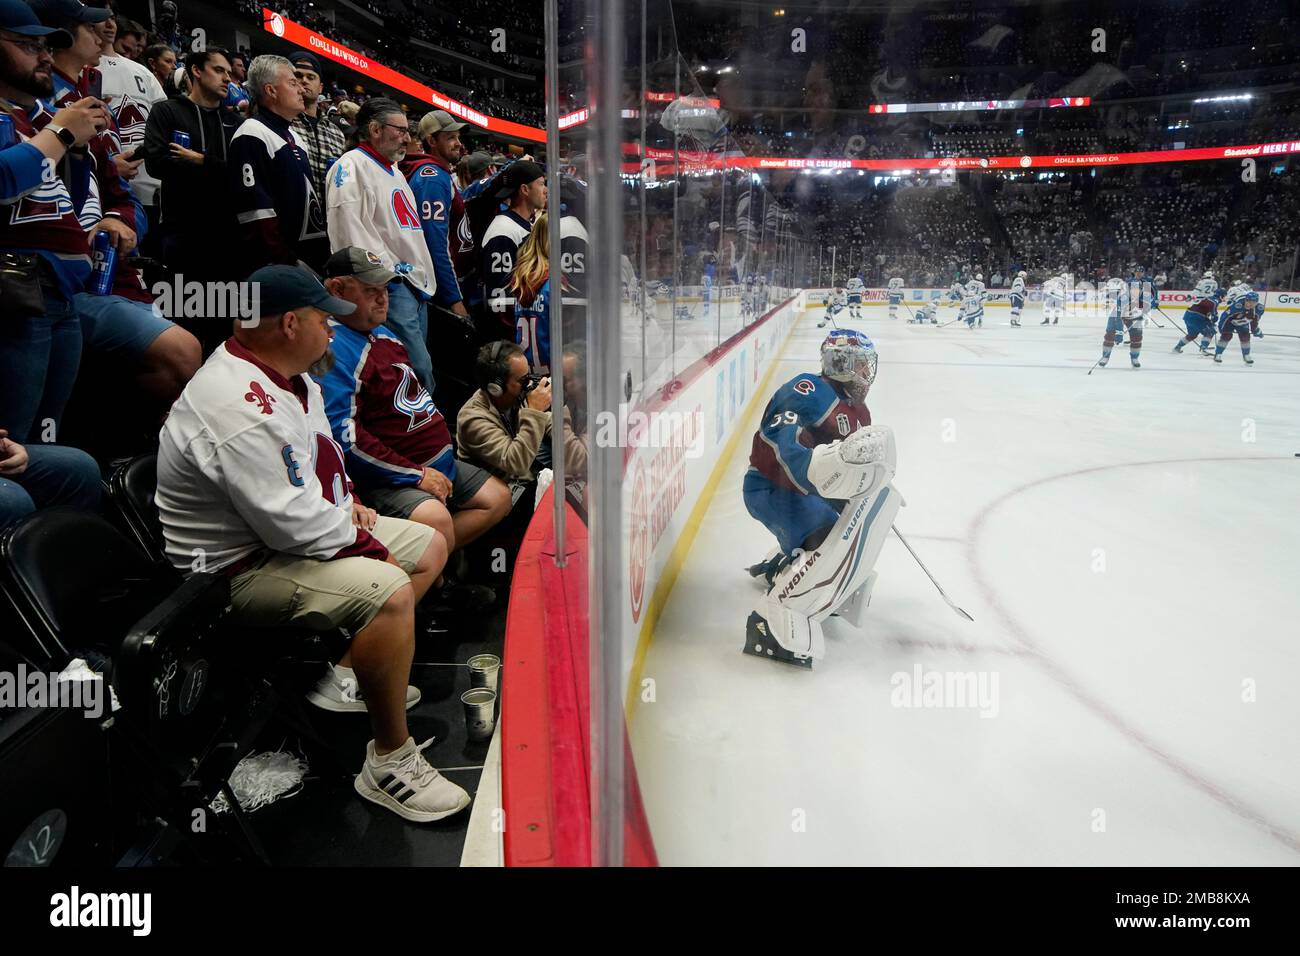 Fans watch Colorado Avalanche goaltender Pavel Francouz warm up before Game 1 of the NHL hockey Stanley Cup Final between the Colorado Avalanche and the Tampa Bay Lightning Wednesday, June 15, 2022,